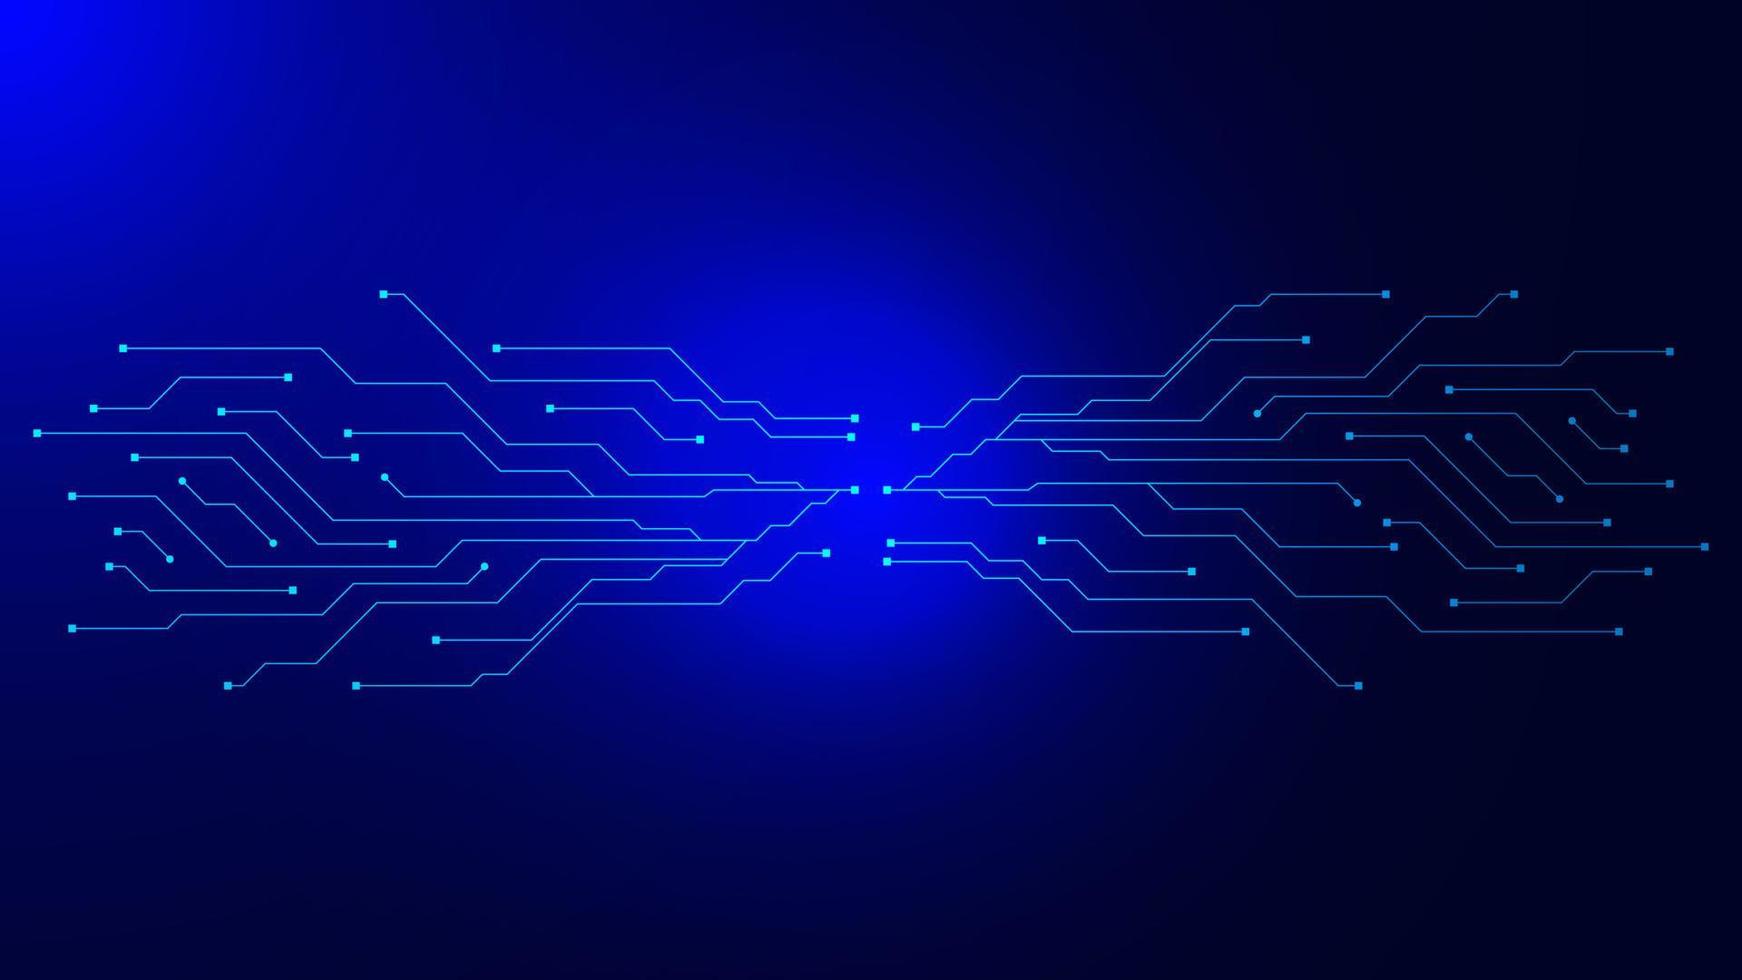 Electronic circuit board technology concept background. Abstract blue technology background template design. Vector illustration. EPS 10.